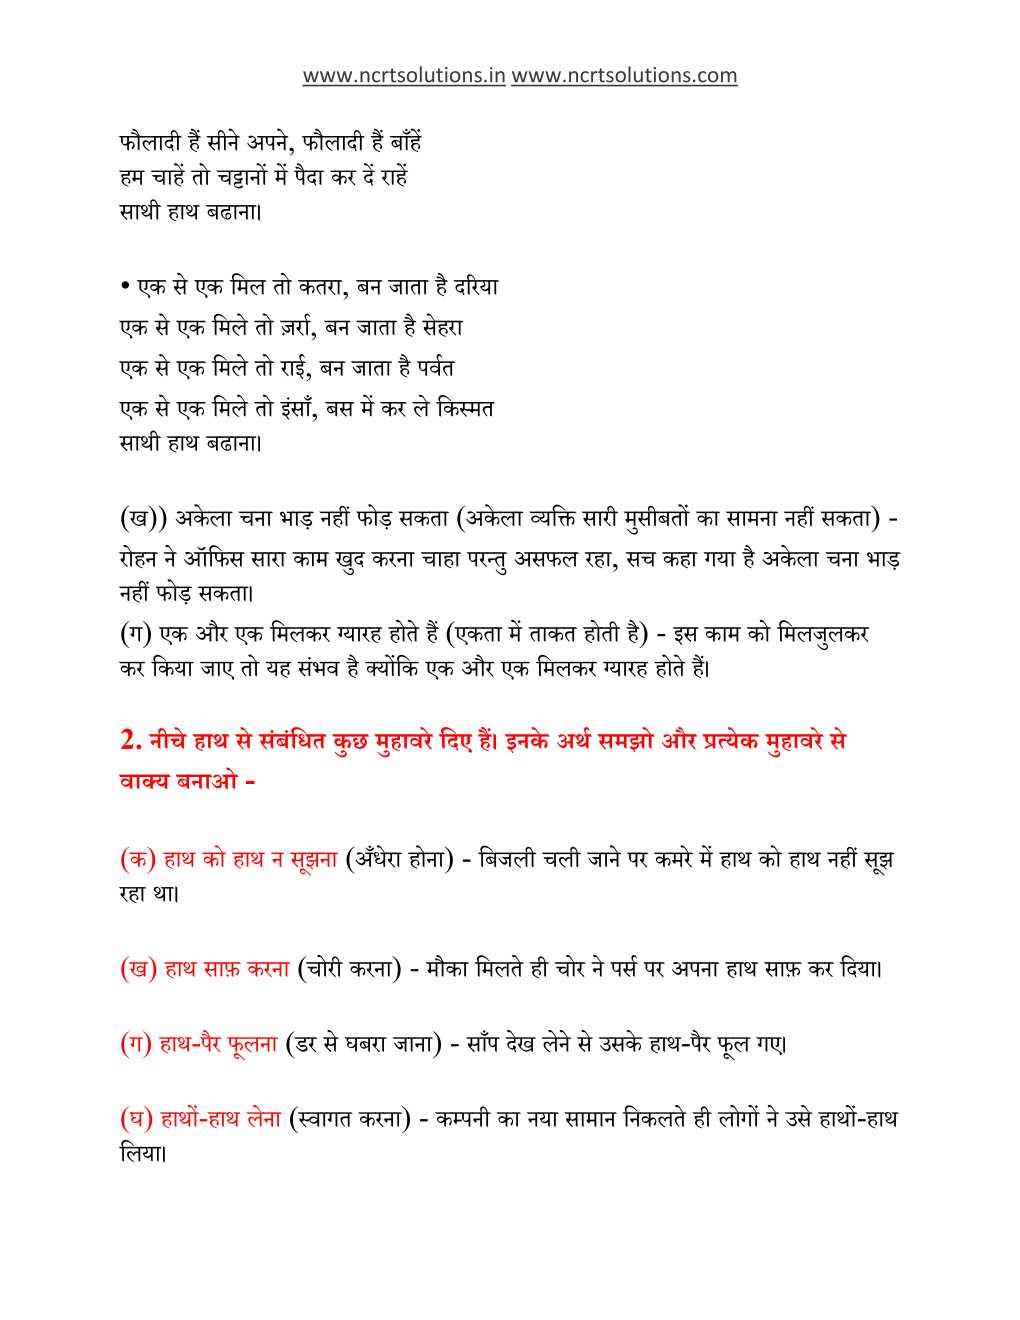 NCERT Solutions For Class 6 Hindi Vasant Chapter 7